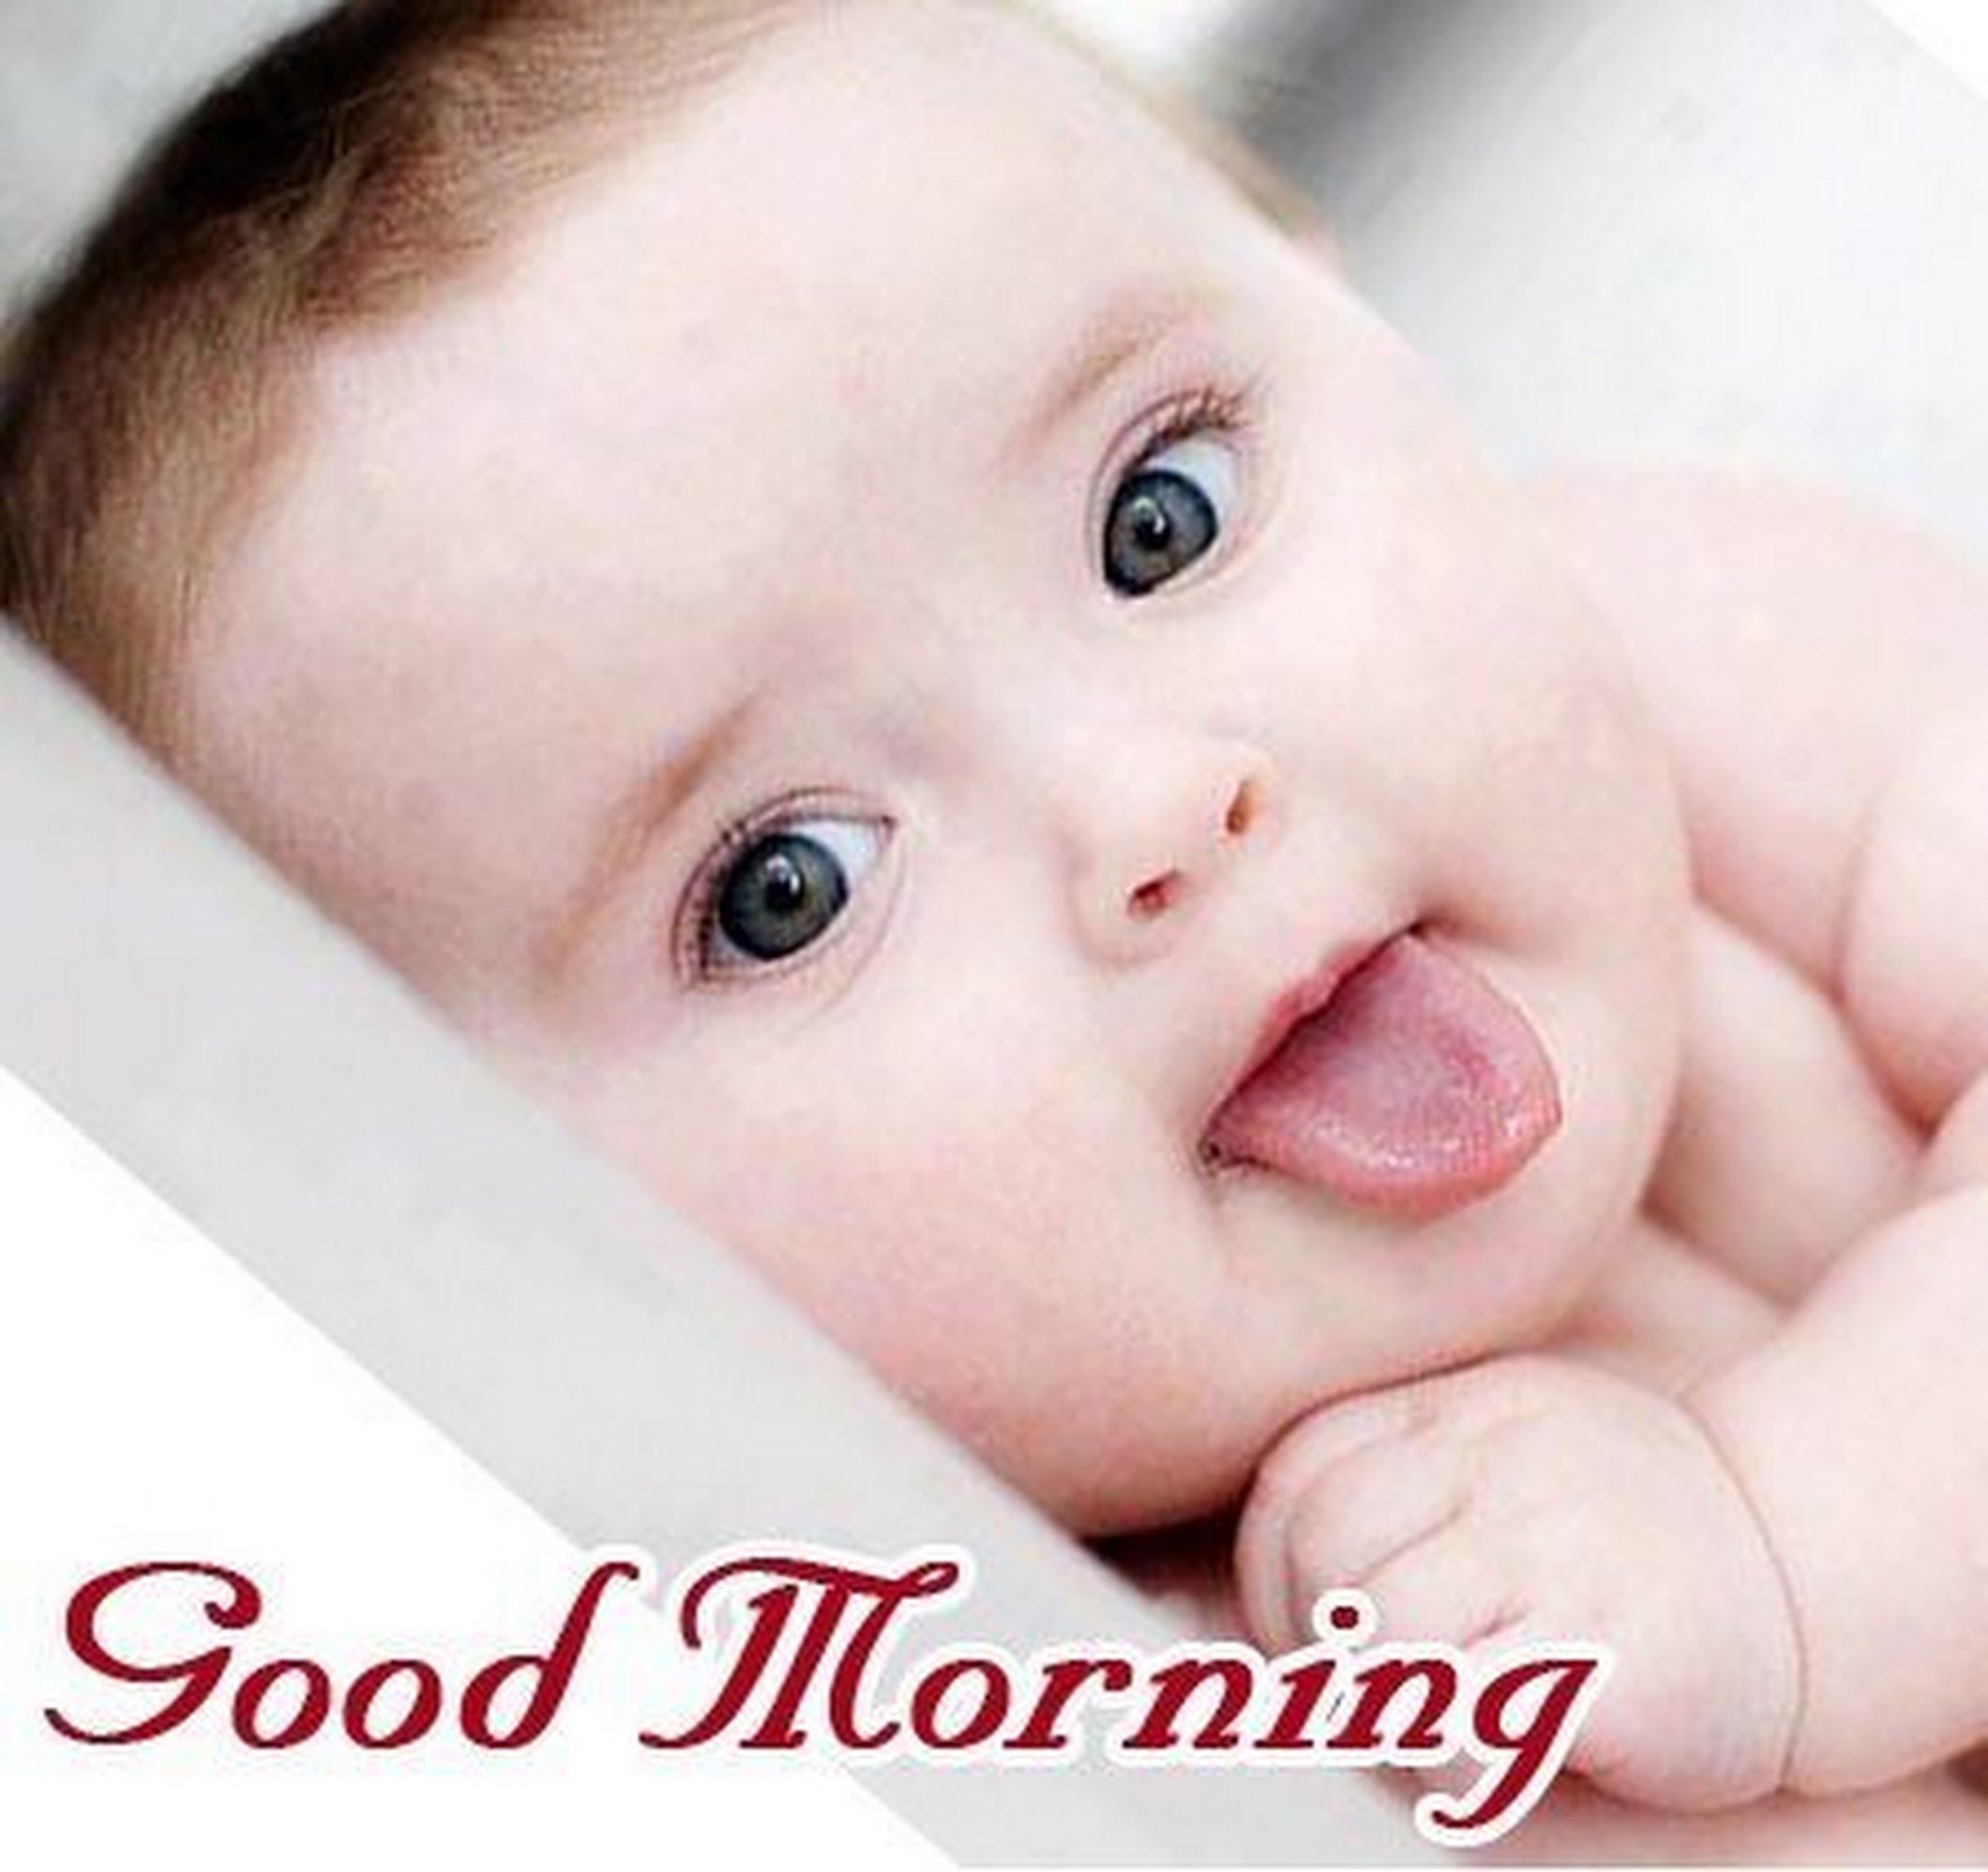 Sign in. Cute good morning image, Cute good morning, Good night baby